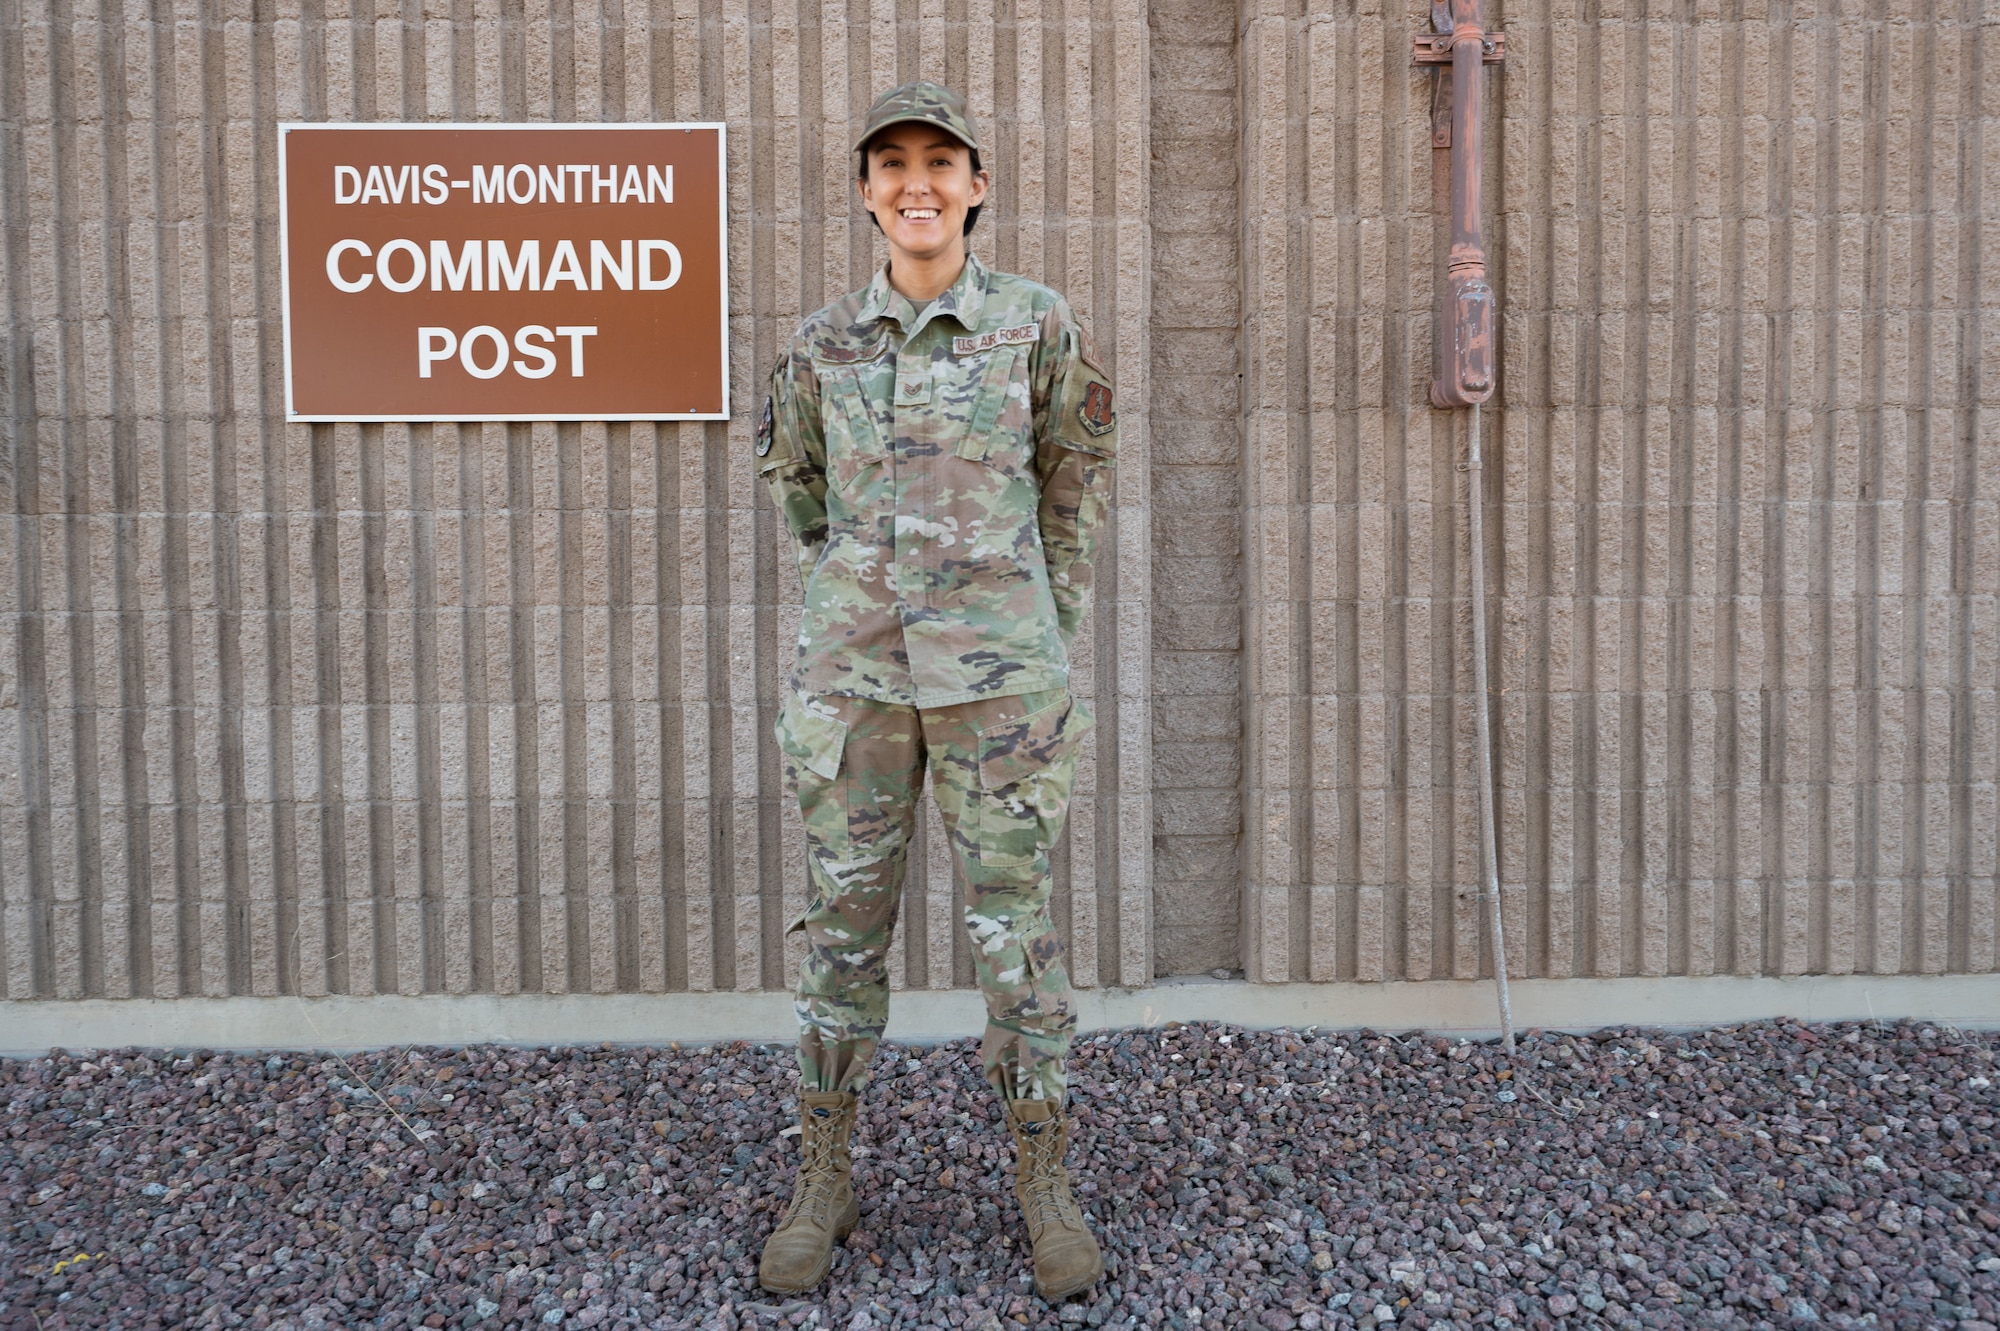 U.S. Air Force SSgt. Cliantha Yasenchack, 355th Wing Command Post command and control operations specialist, poses for a photo at Davis-Monthan Air Force Base, Ariz., Nov. 1, 2023. Yasenchak mitigated an explosives threat in Tucson by contacting Explosive Ordnance Disposal. (U.S. Air Force photo by Airman 1st Class Robert Allen Cooke III)